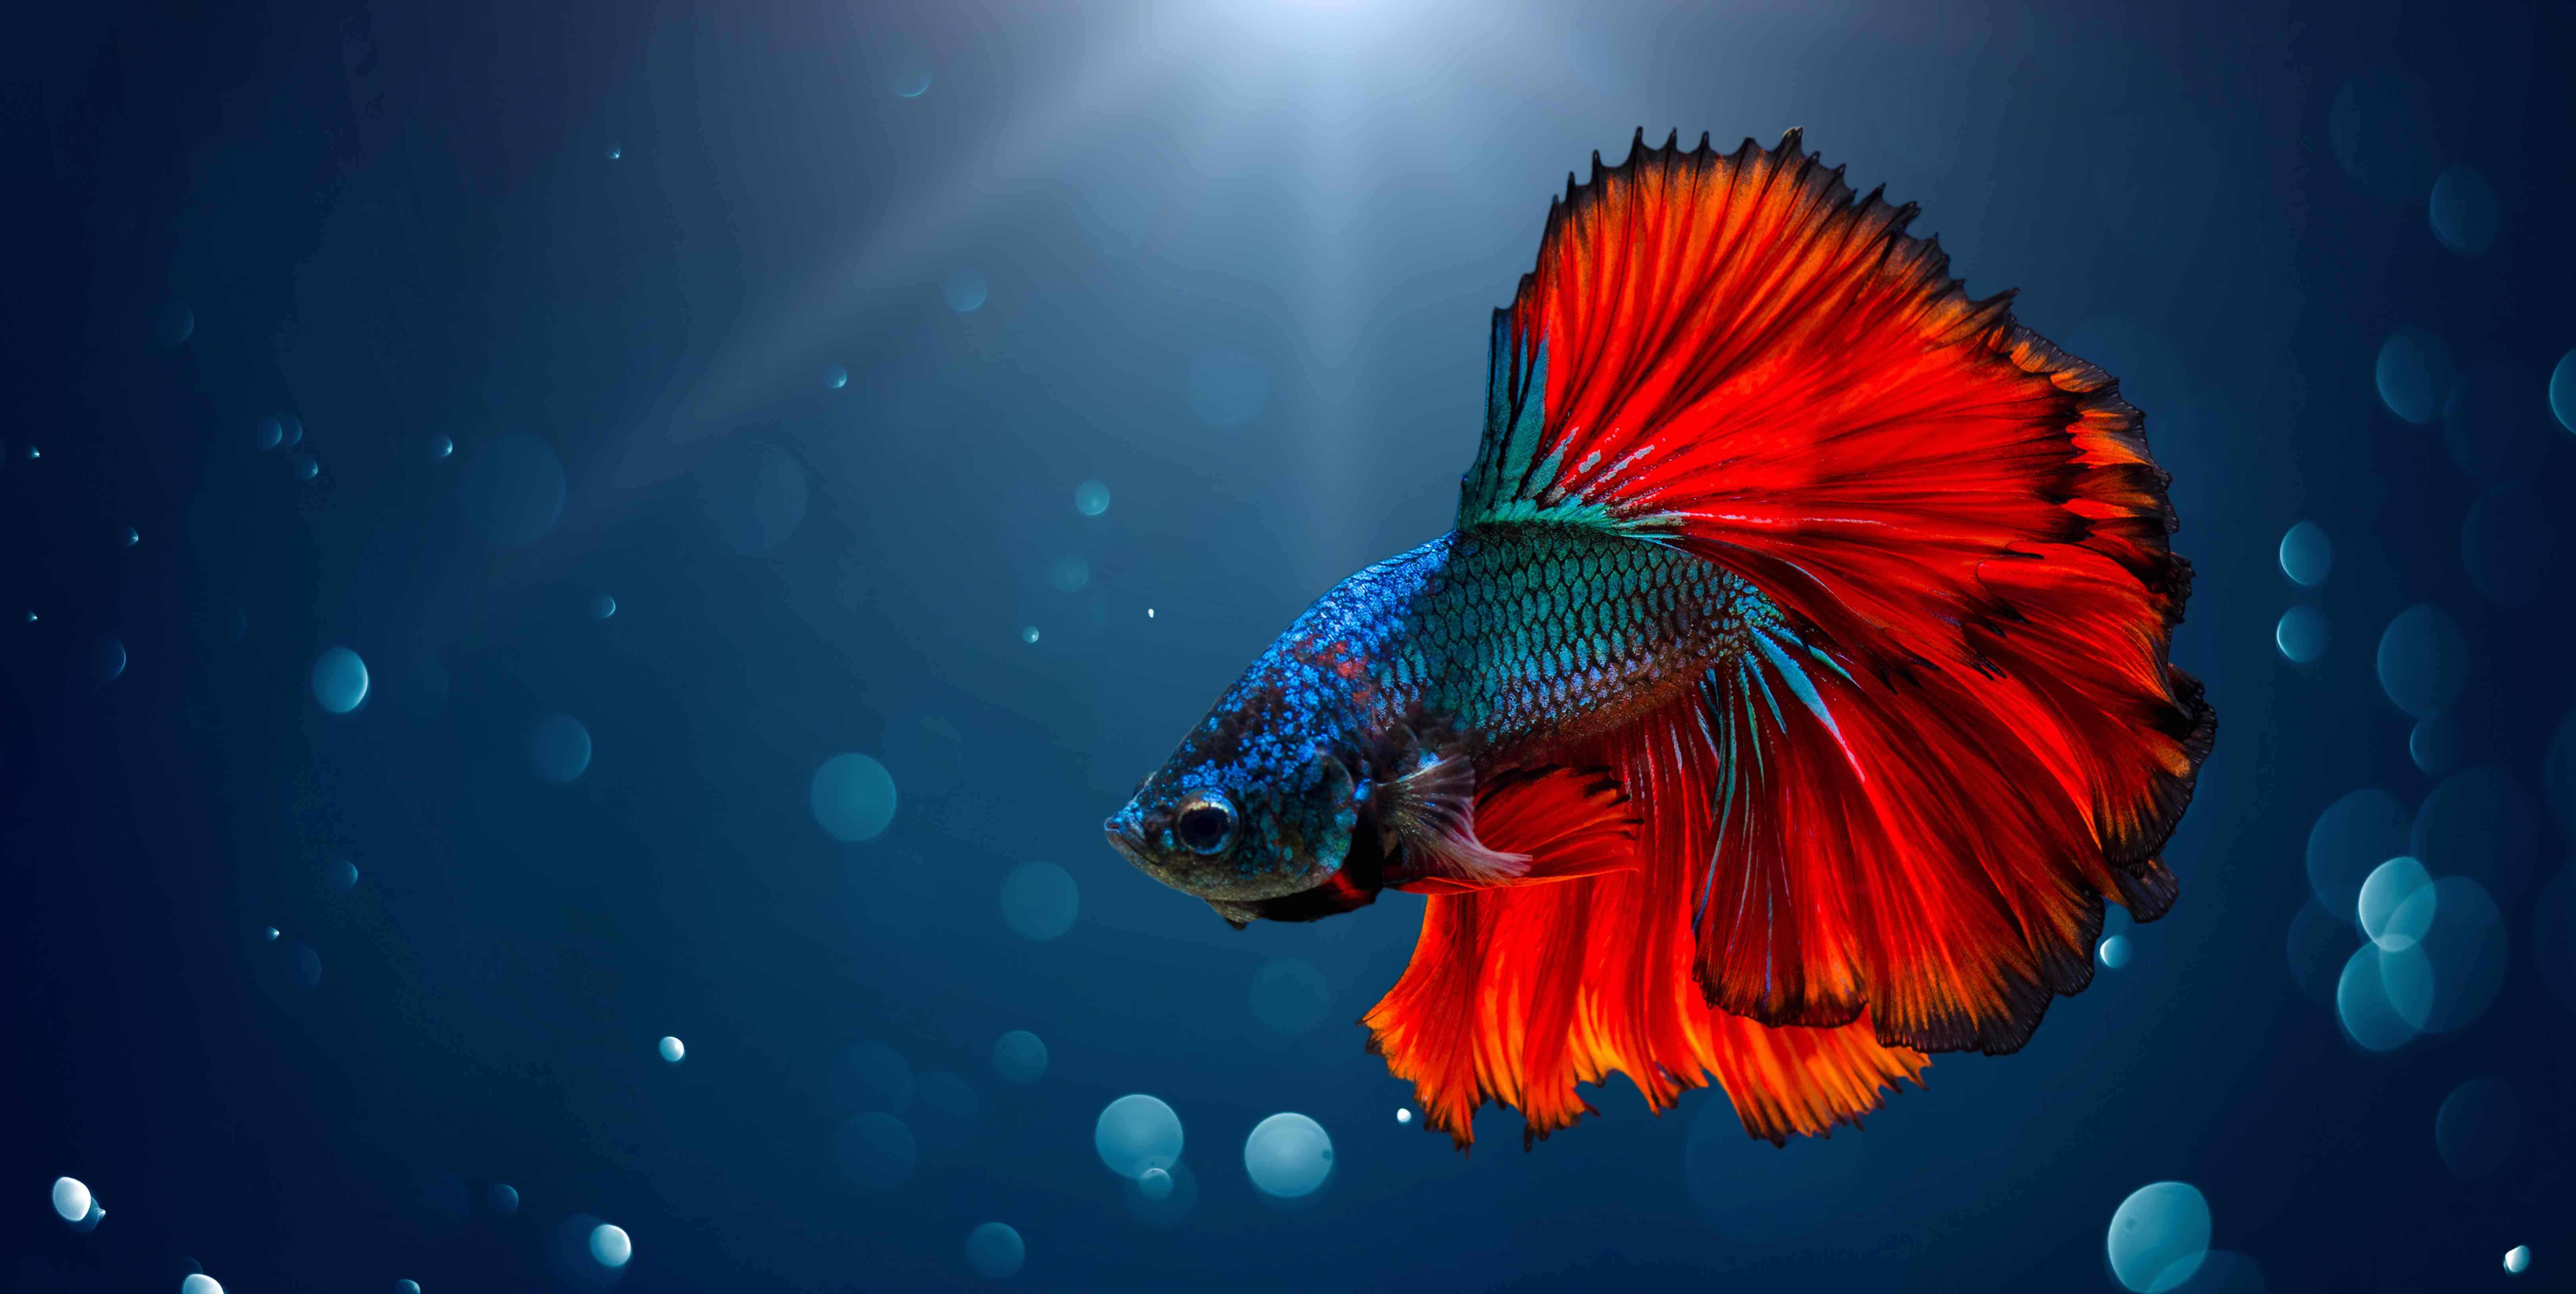 40 Facts About Betta Fish: The Siamese Fighting Fish 